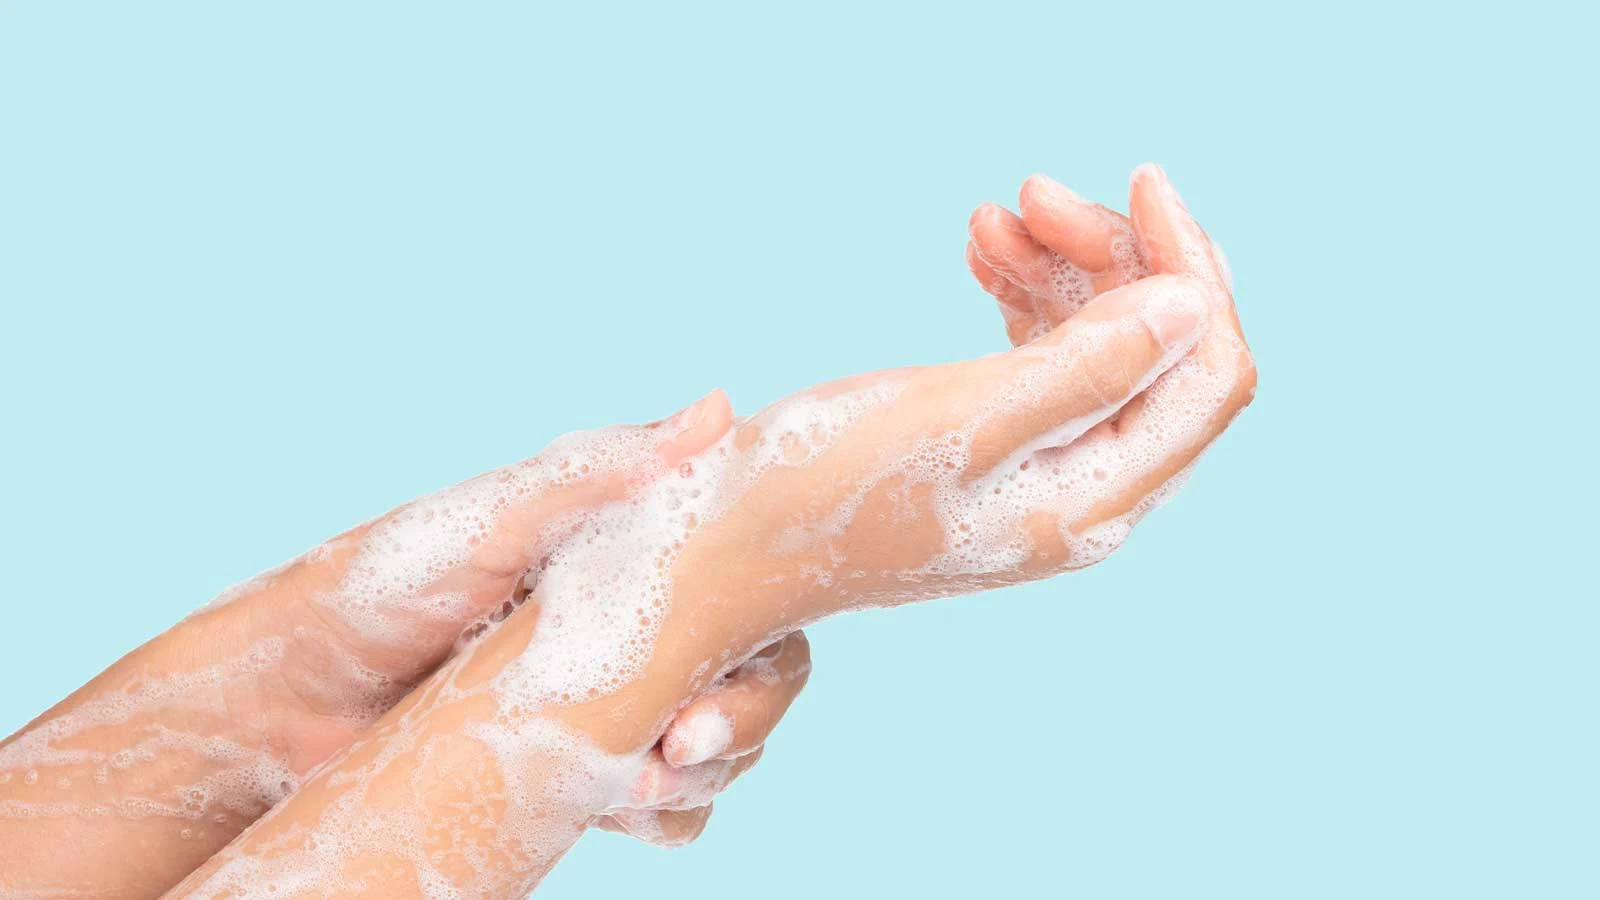 Female hands covered in soap